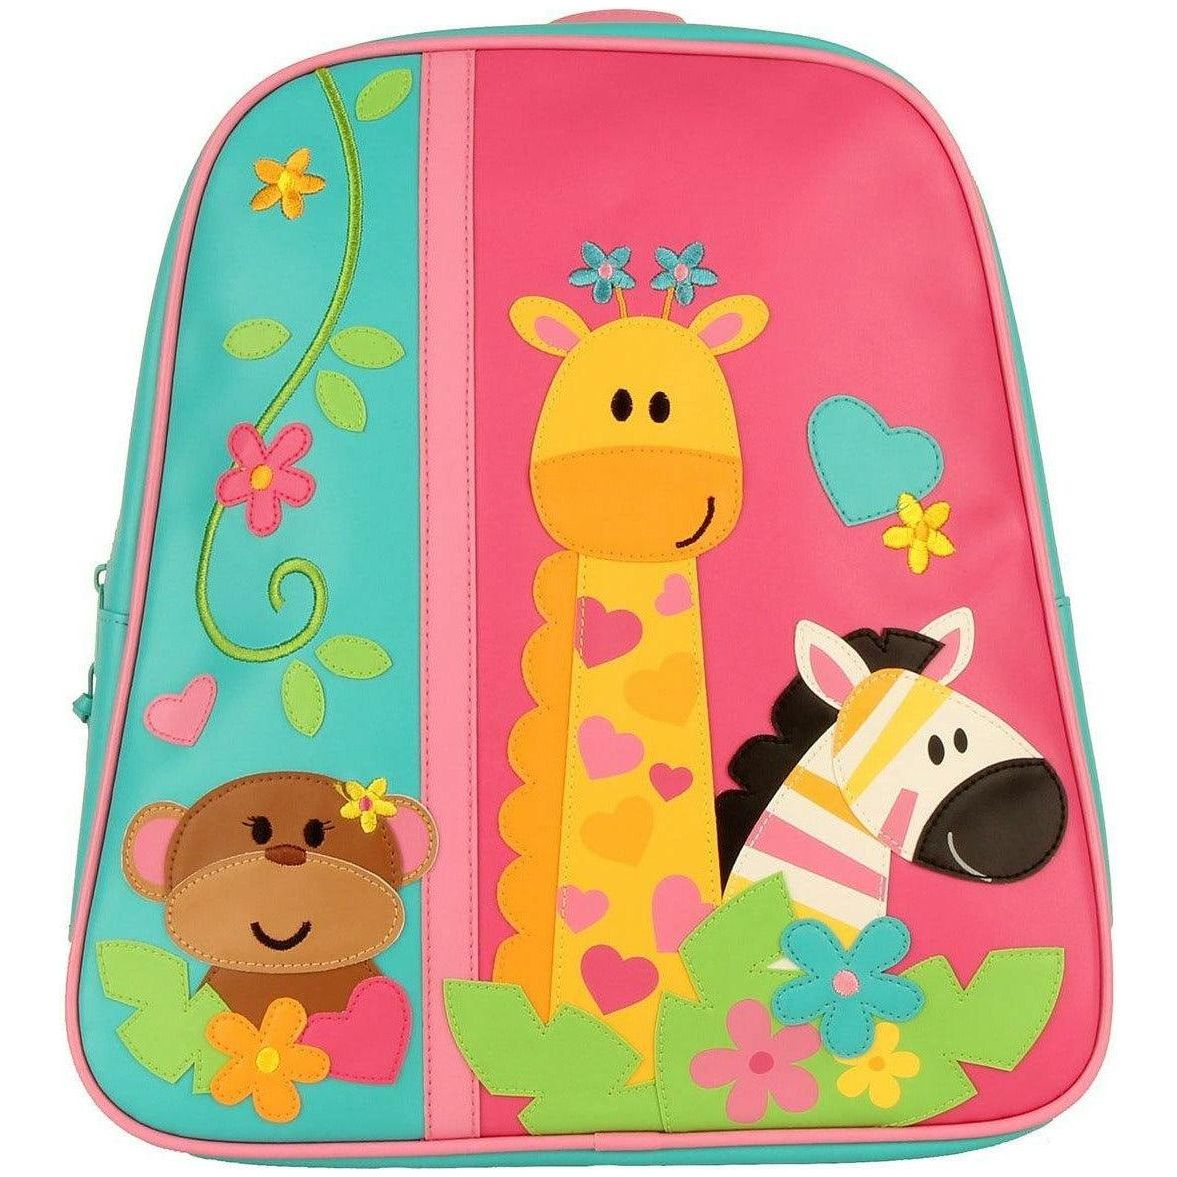 Stephen Joseph Go Go Backpack Zoo - BumbleToys - 5-7 Years, Backpack, Cecil, Girls, Pre-Order, School Supplies